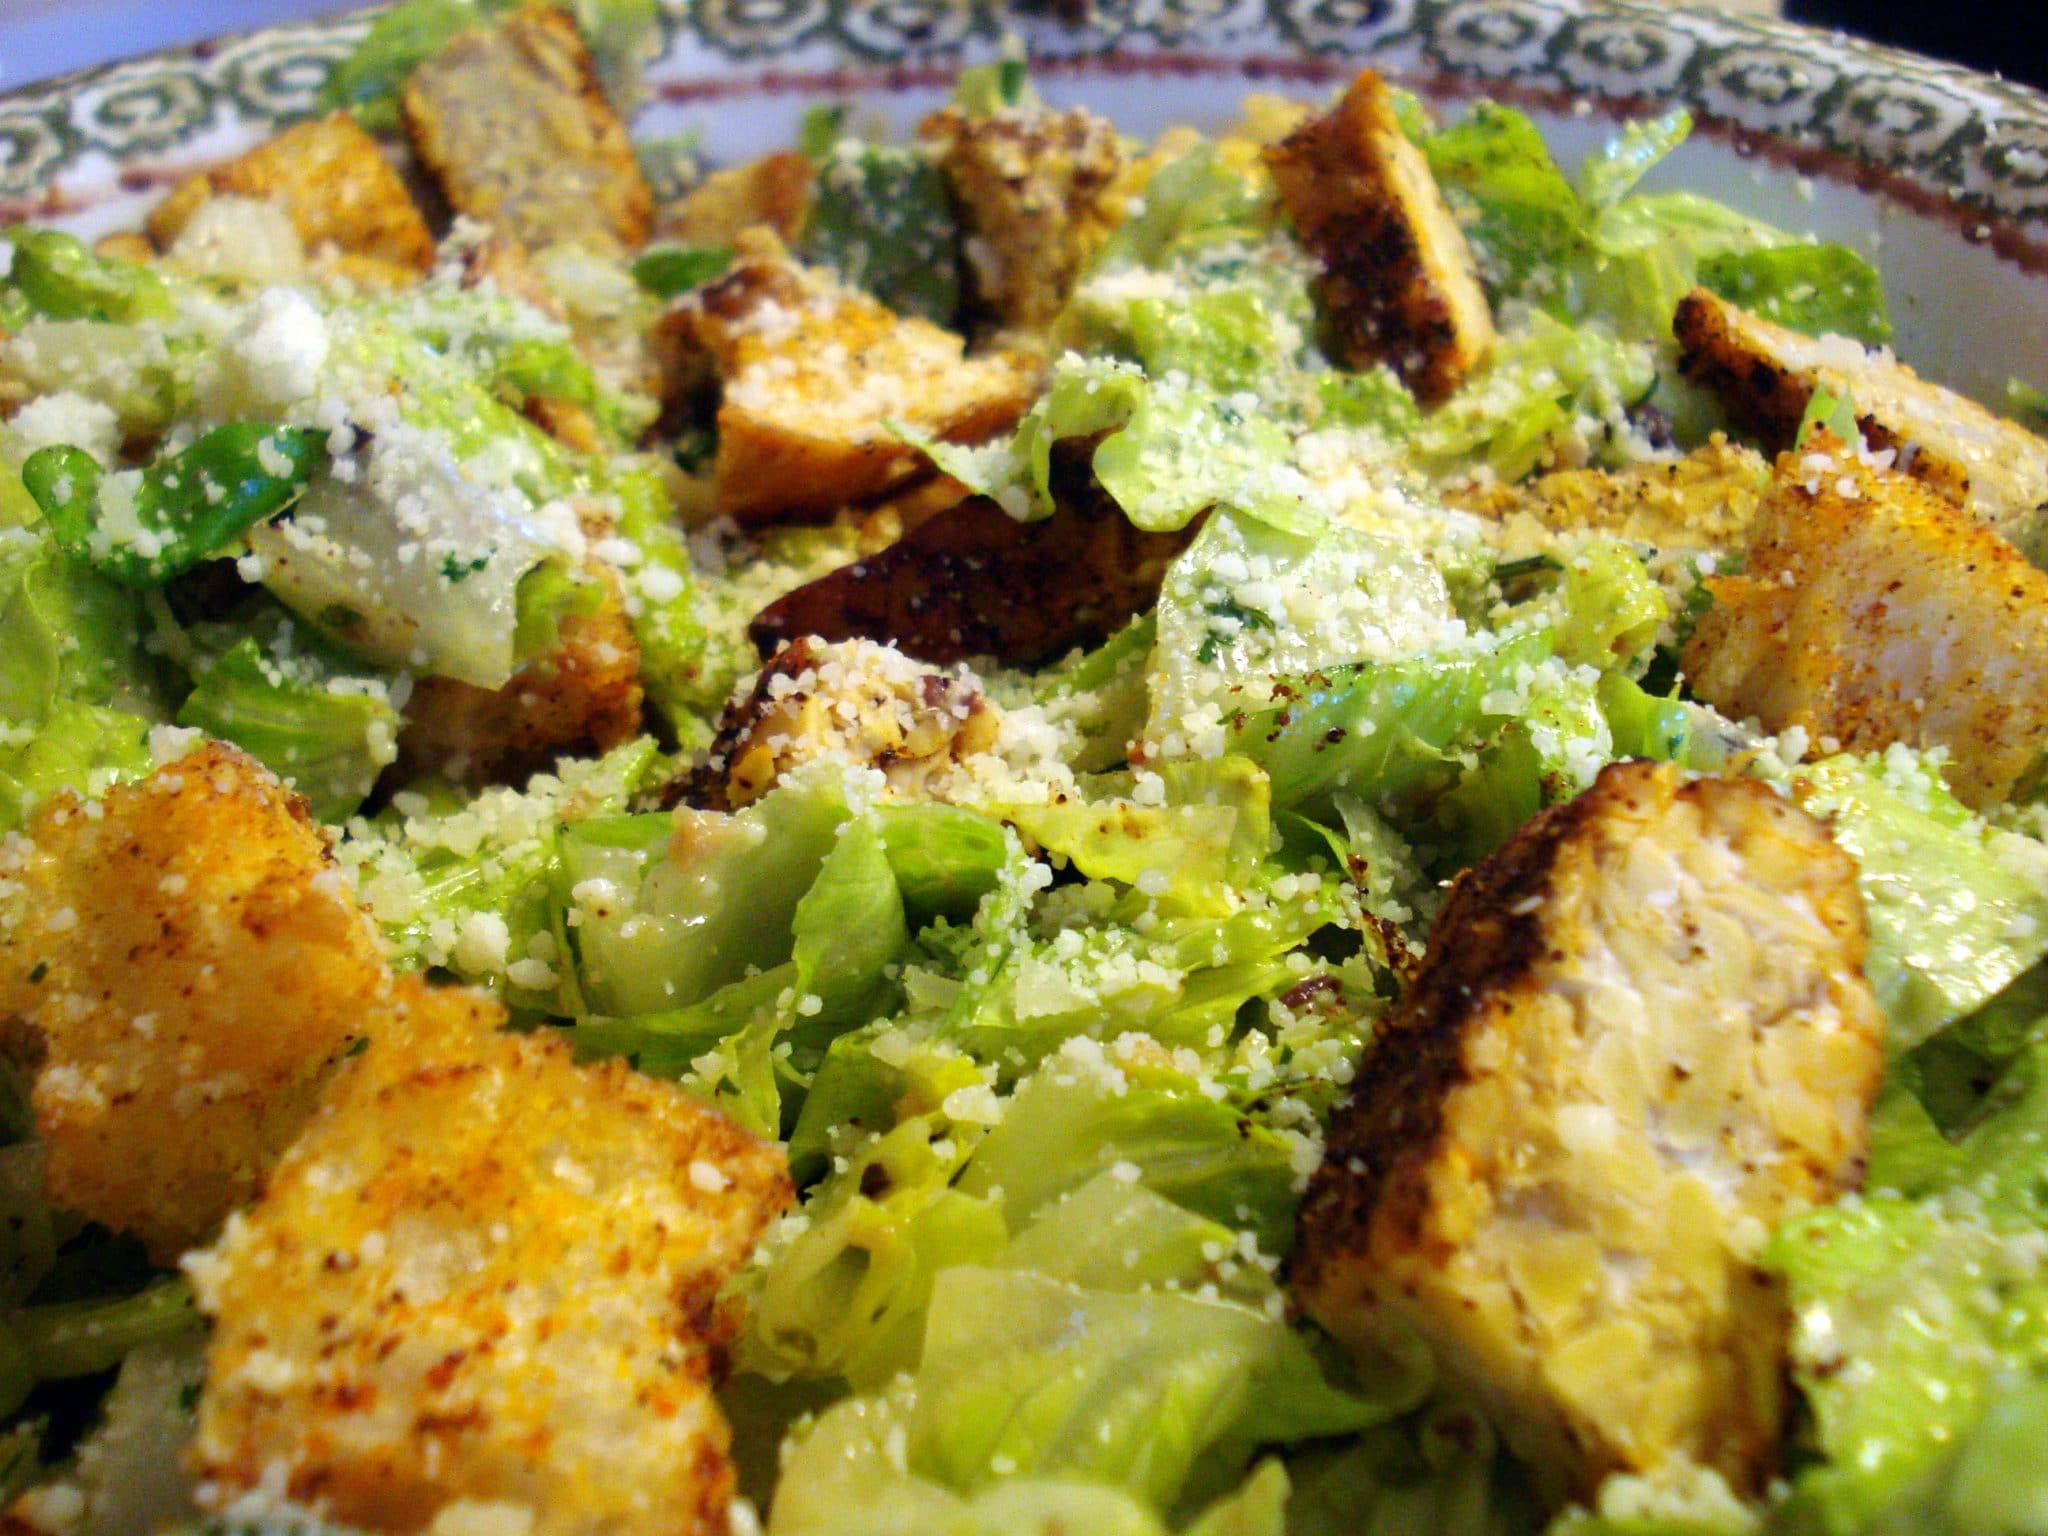 Vegan Southwest Caesar Salad with Grilled Tempeh that resembles croutons